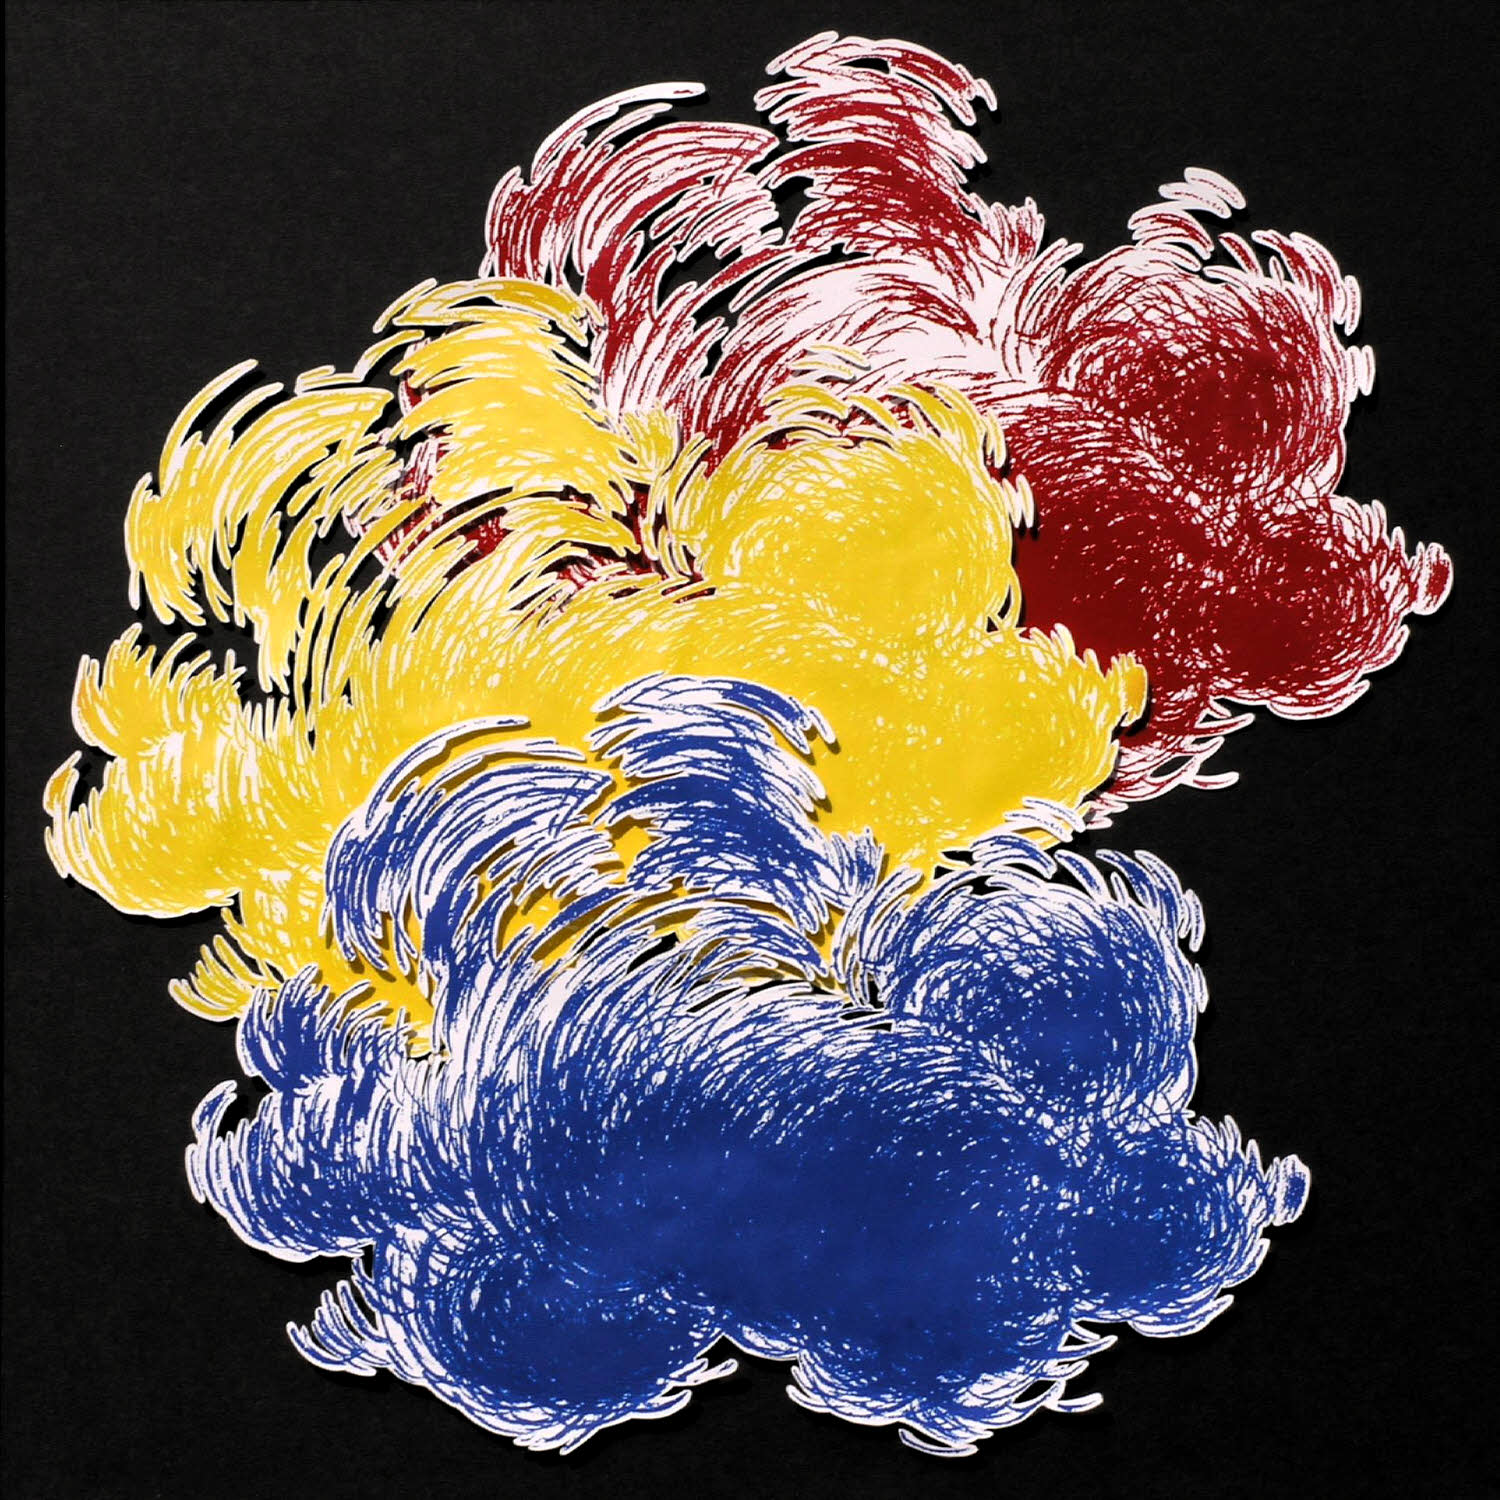 Red Yellow Blue, 2006, silkscreen collage, 20x20 inches